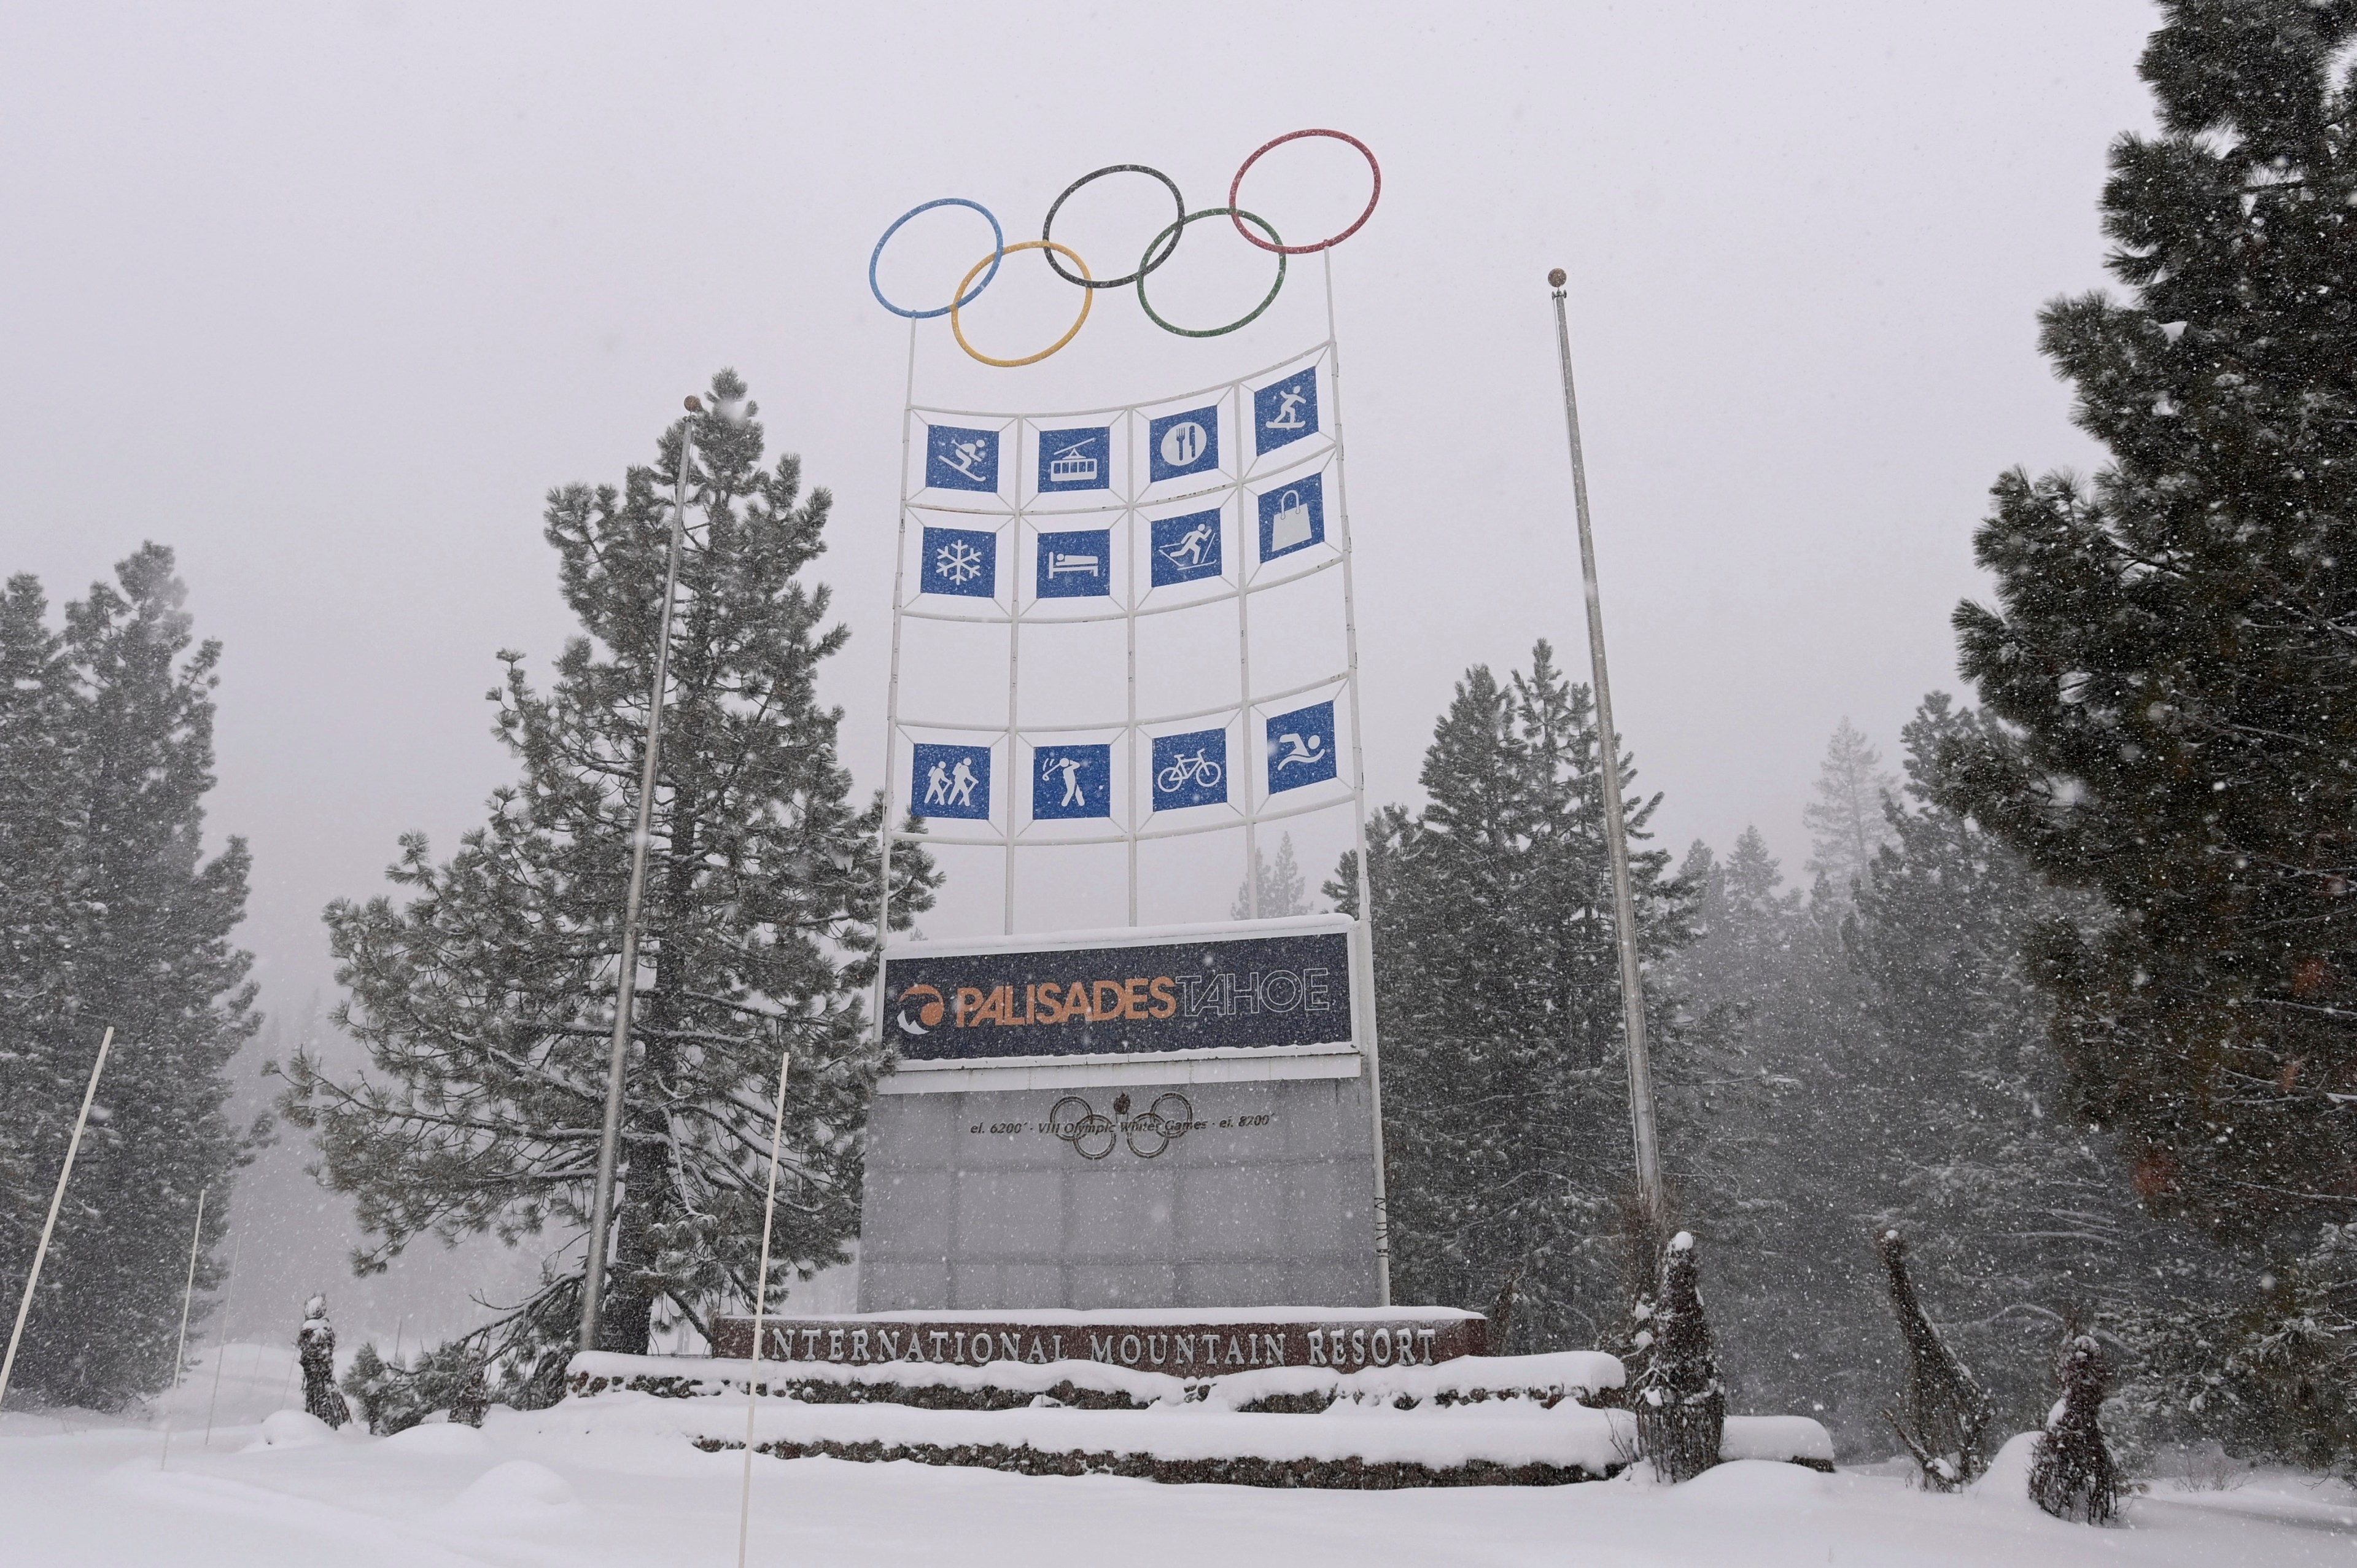 Snow falls on a ski resort entrance sign featuring olympic rings